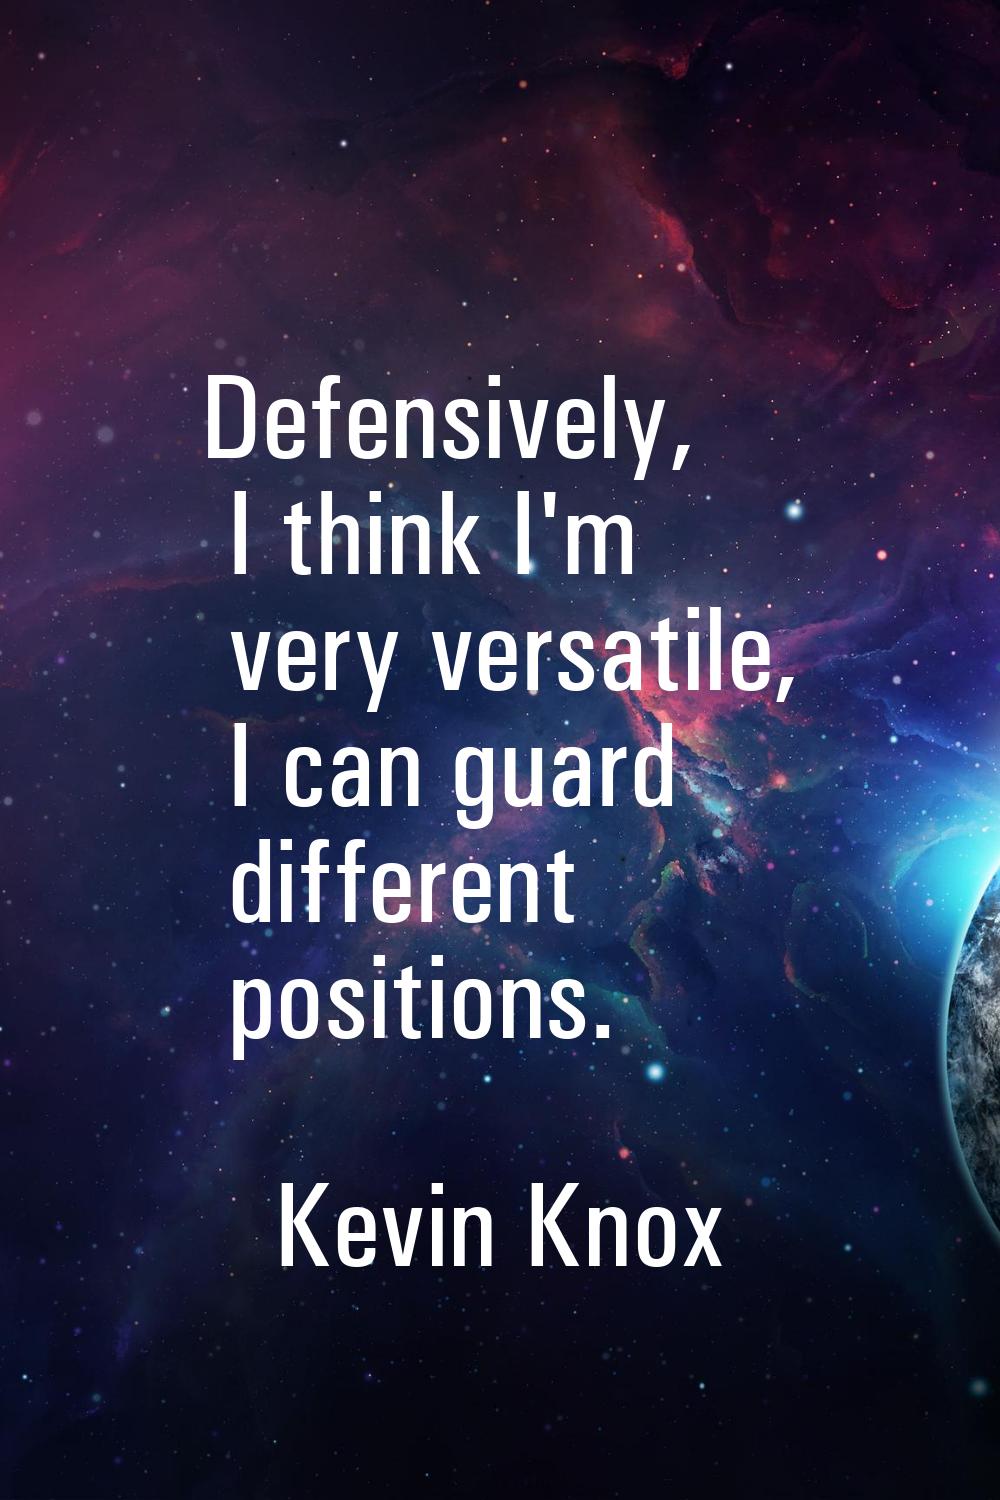 Defensively, I think I'm very versatile, I can guard different positions.